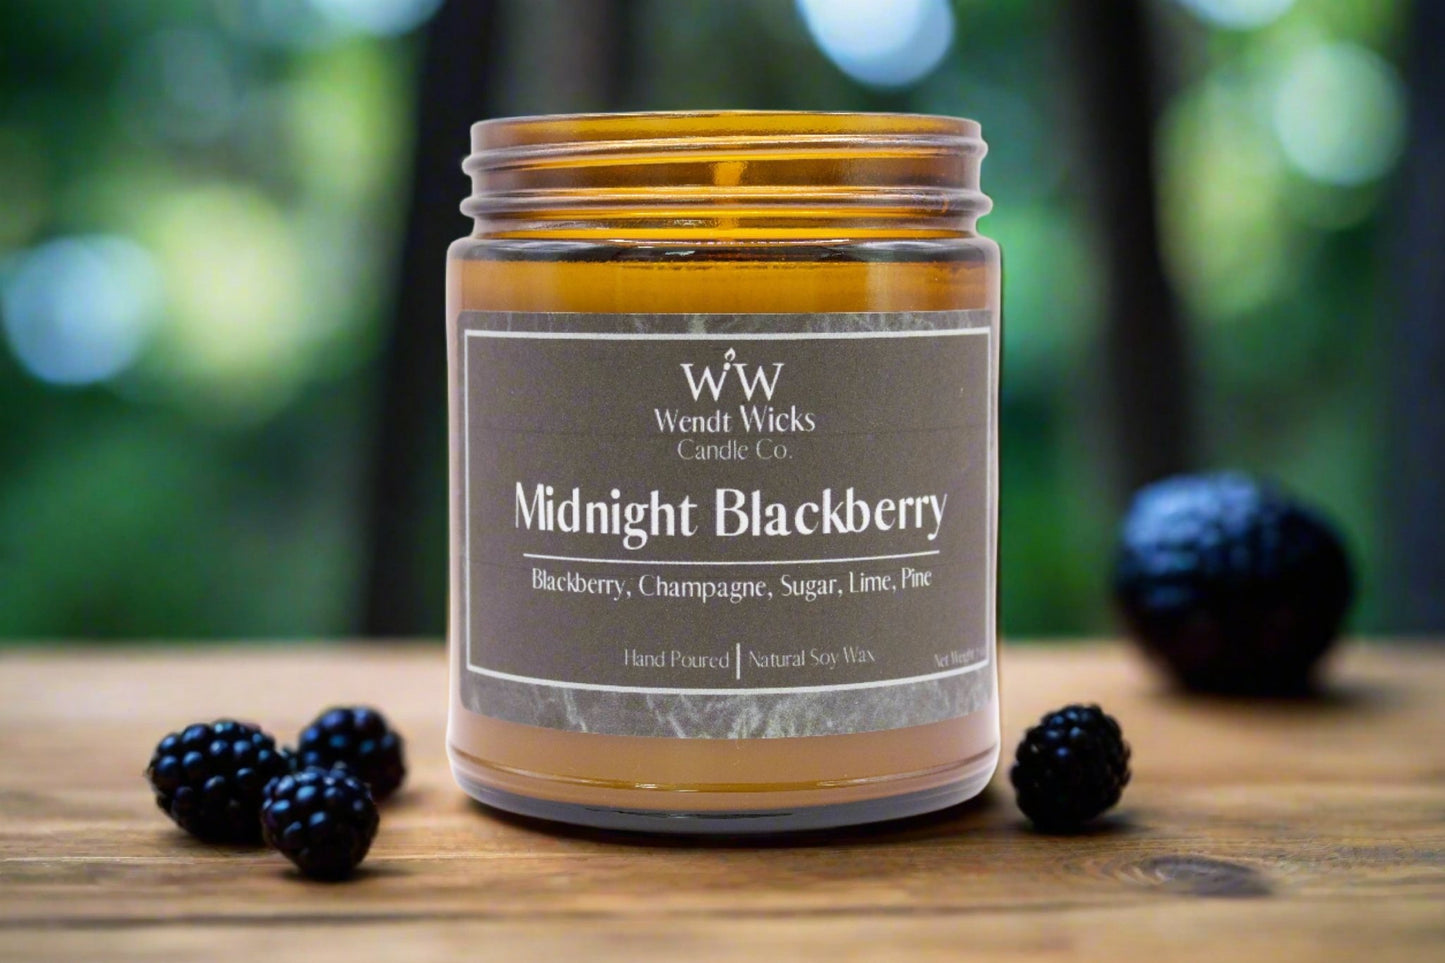 Midnight Blackberry - Wendt Wicks Candle Co. - Amber candle